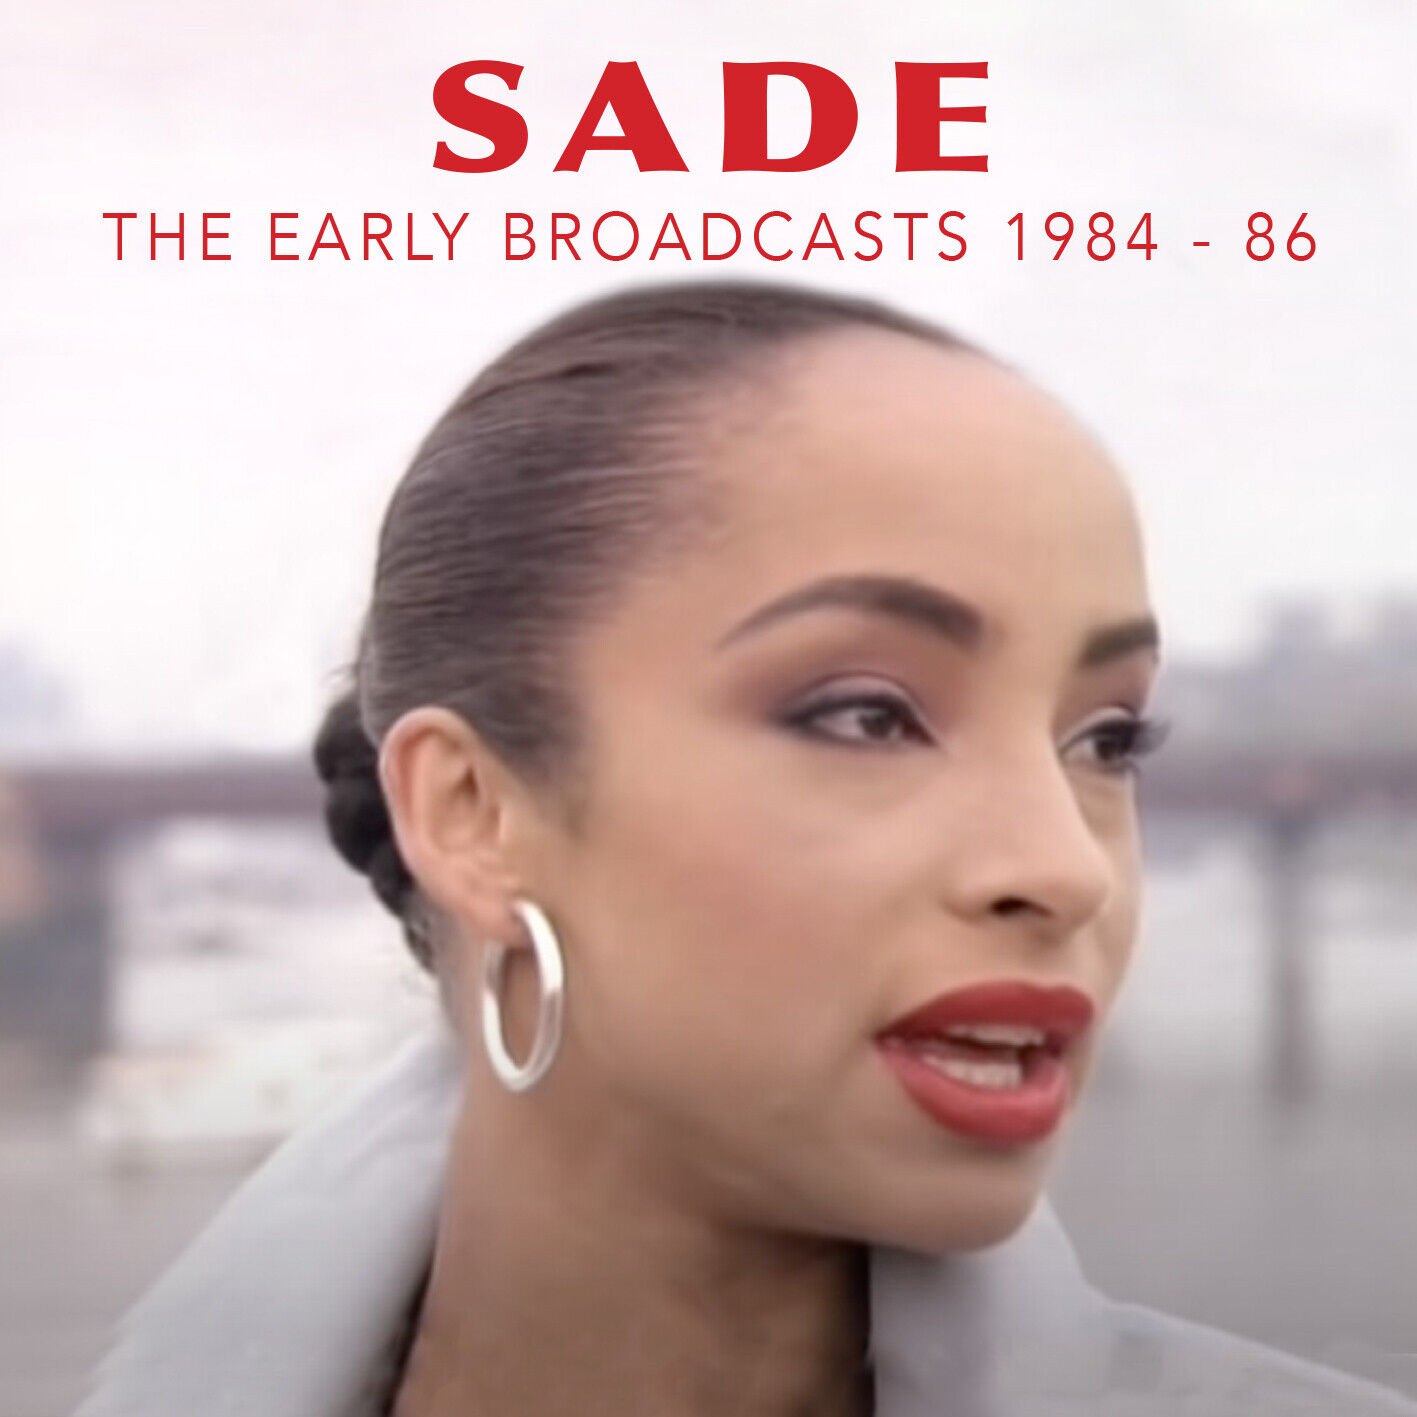 Sade The Early Broadcasts, 1984-1986 (CD) Album (Jewel Case)